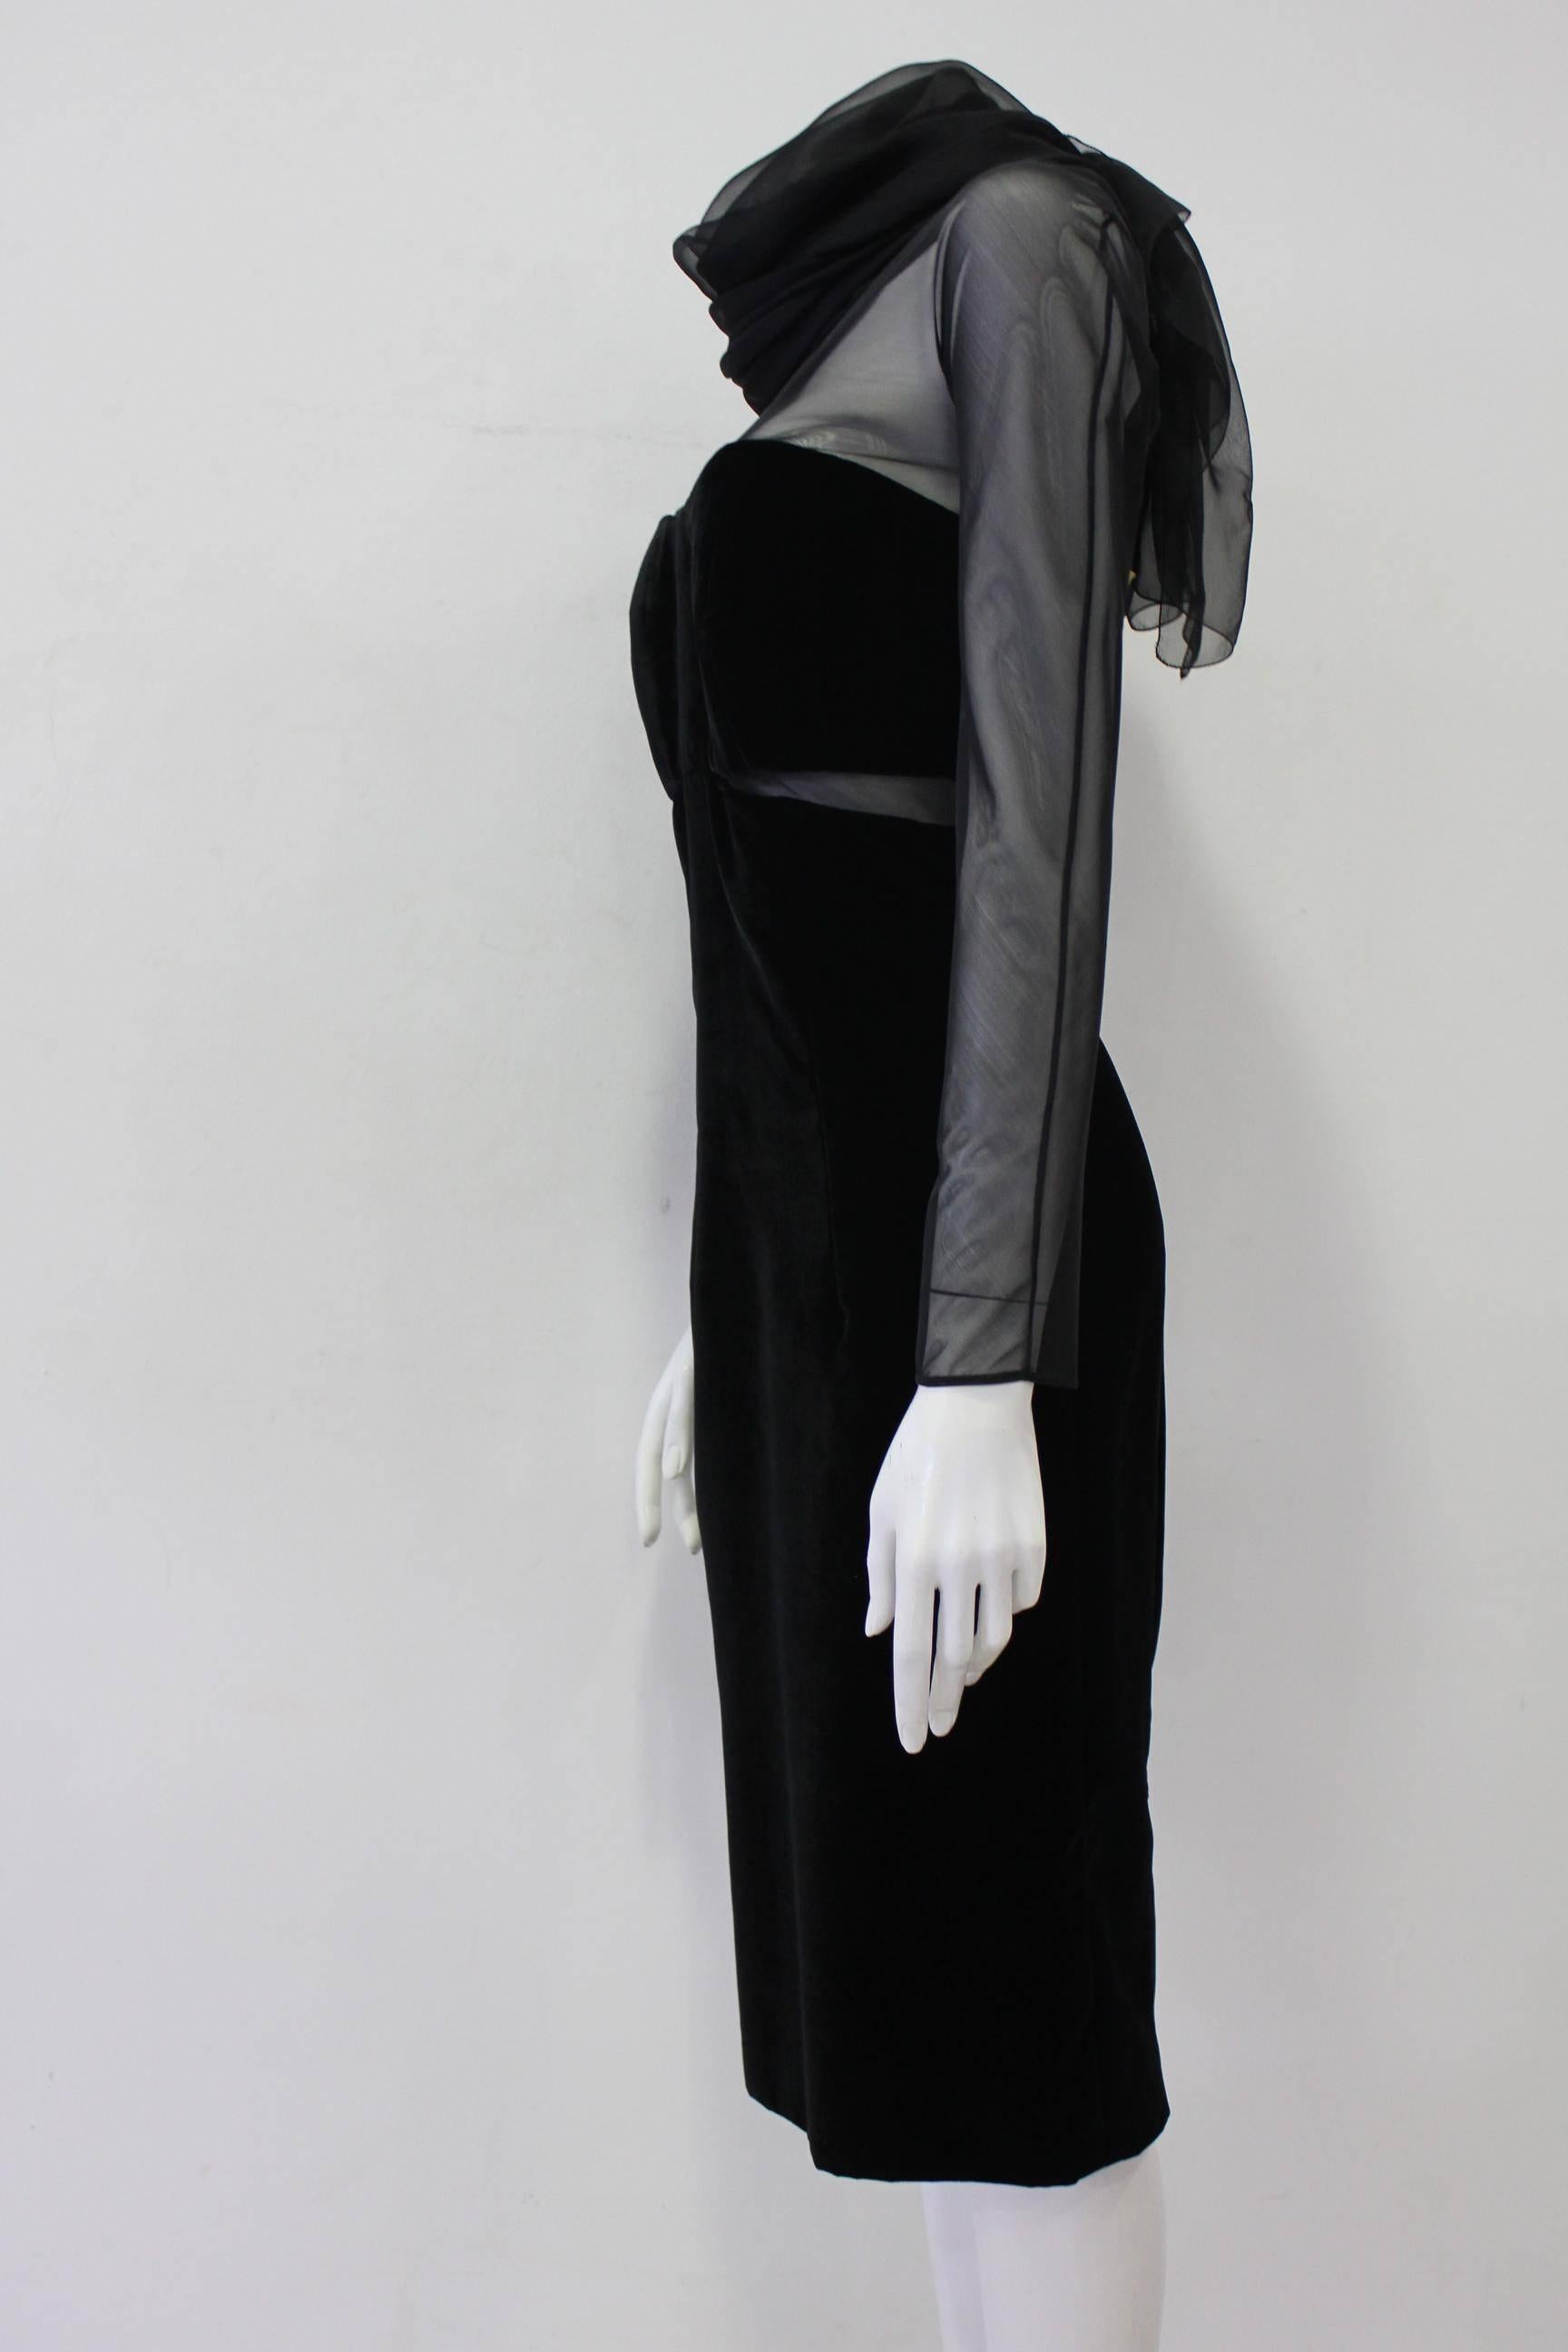 Unique Gianfranco Ferre Sheer Velvet Cocktail Dress 1980s In New Condition For Sale In Athens, Agia Paraskevi